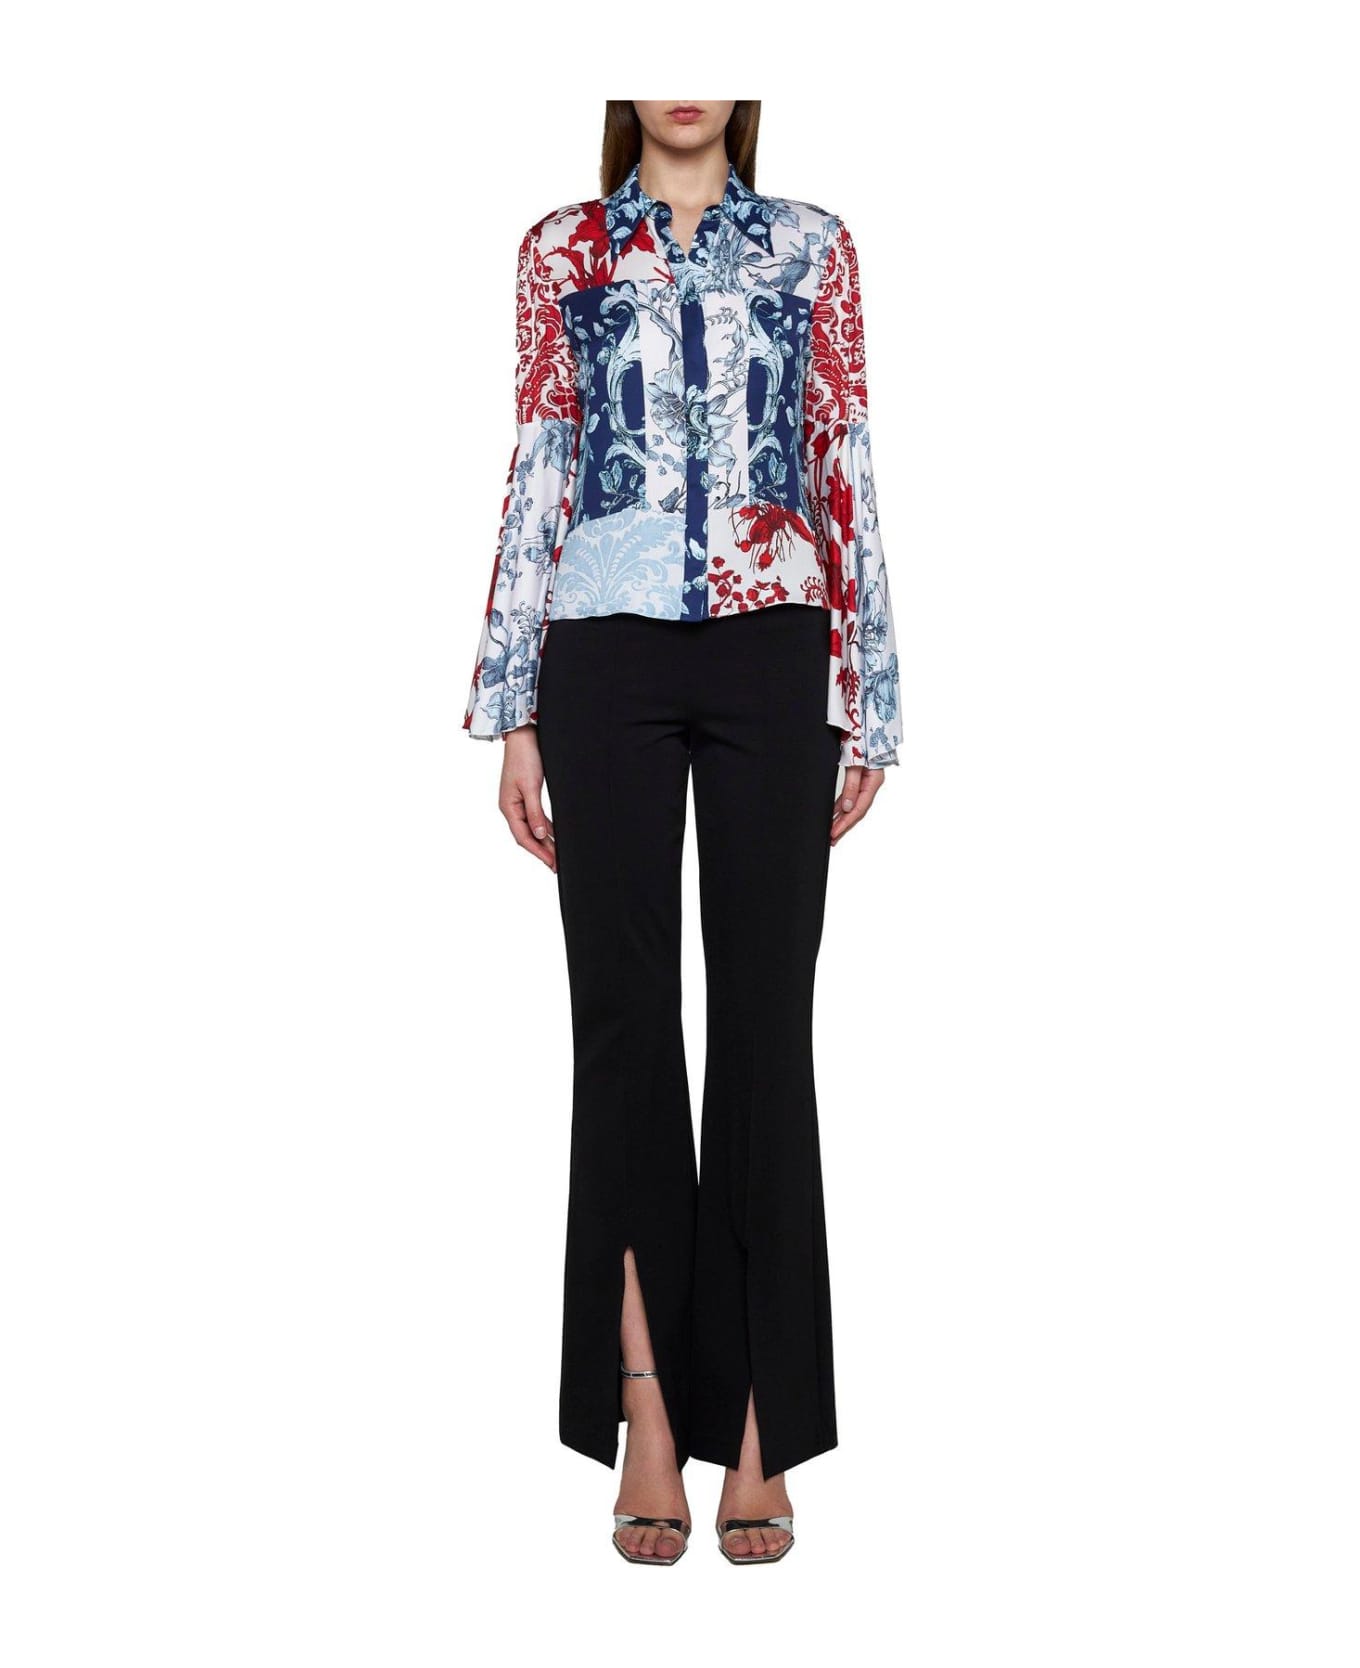 Alice + Olivia Willa Floral-printed Bell-sleeved Blouse - Blue ブラウス